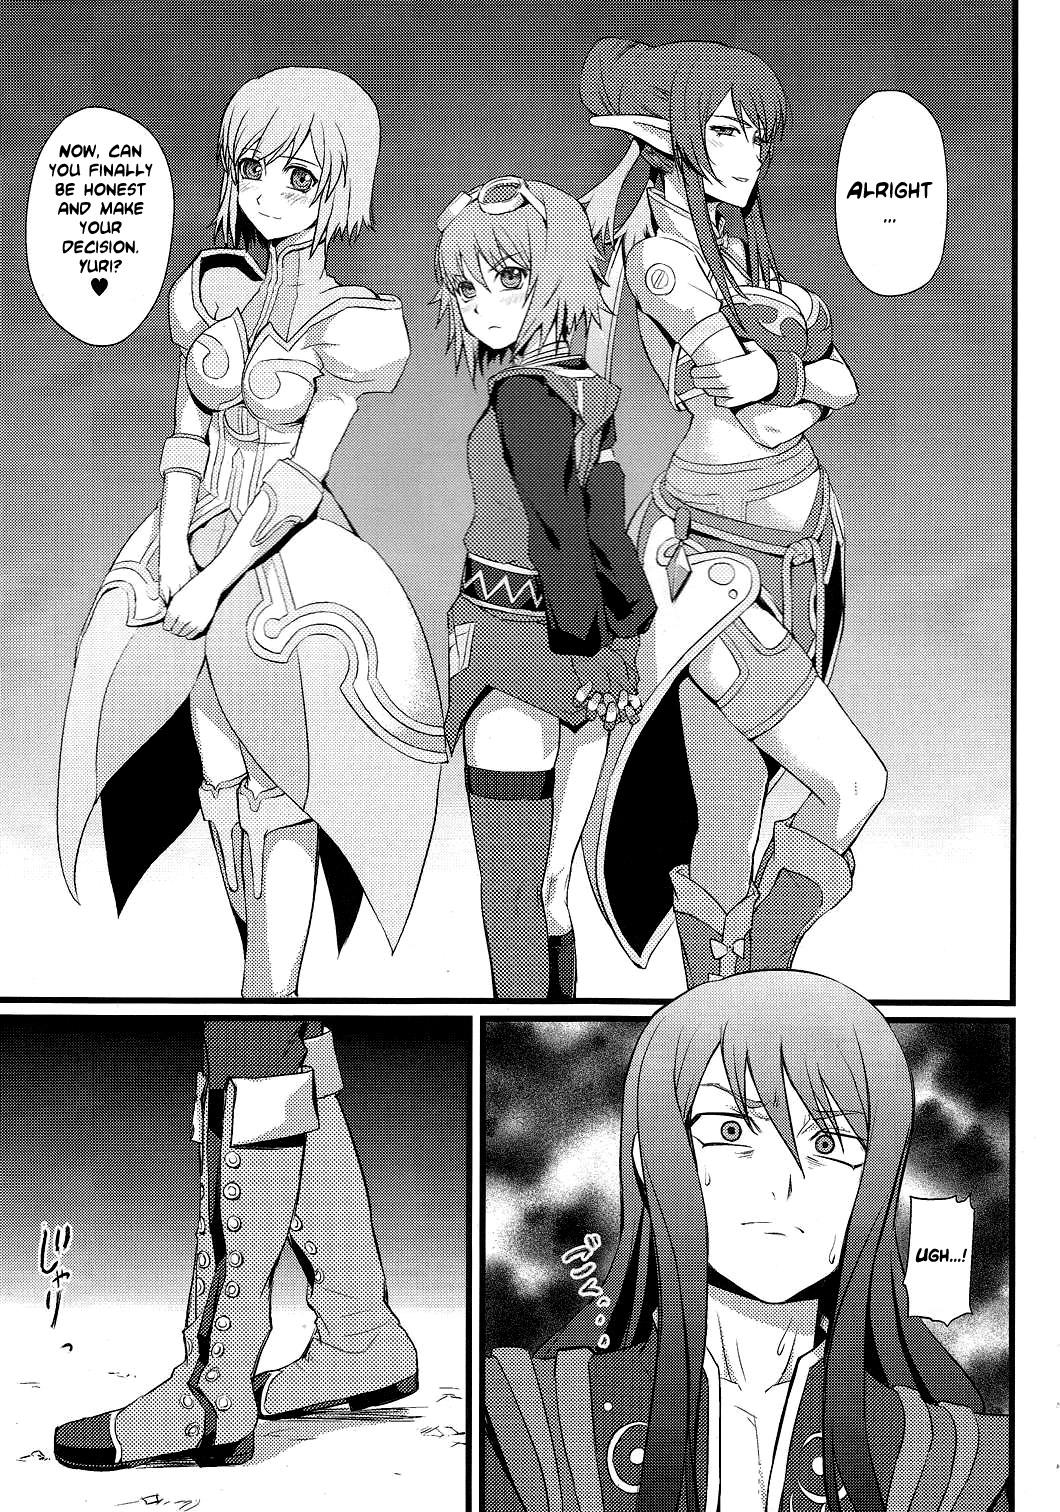 Tiny Strike! Army of Beauties - Tales of vesperia Gayemo - Page 4